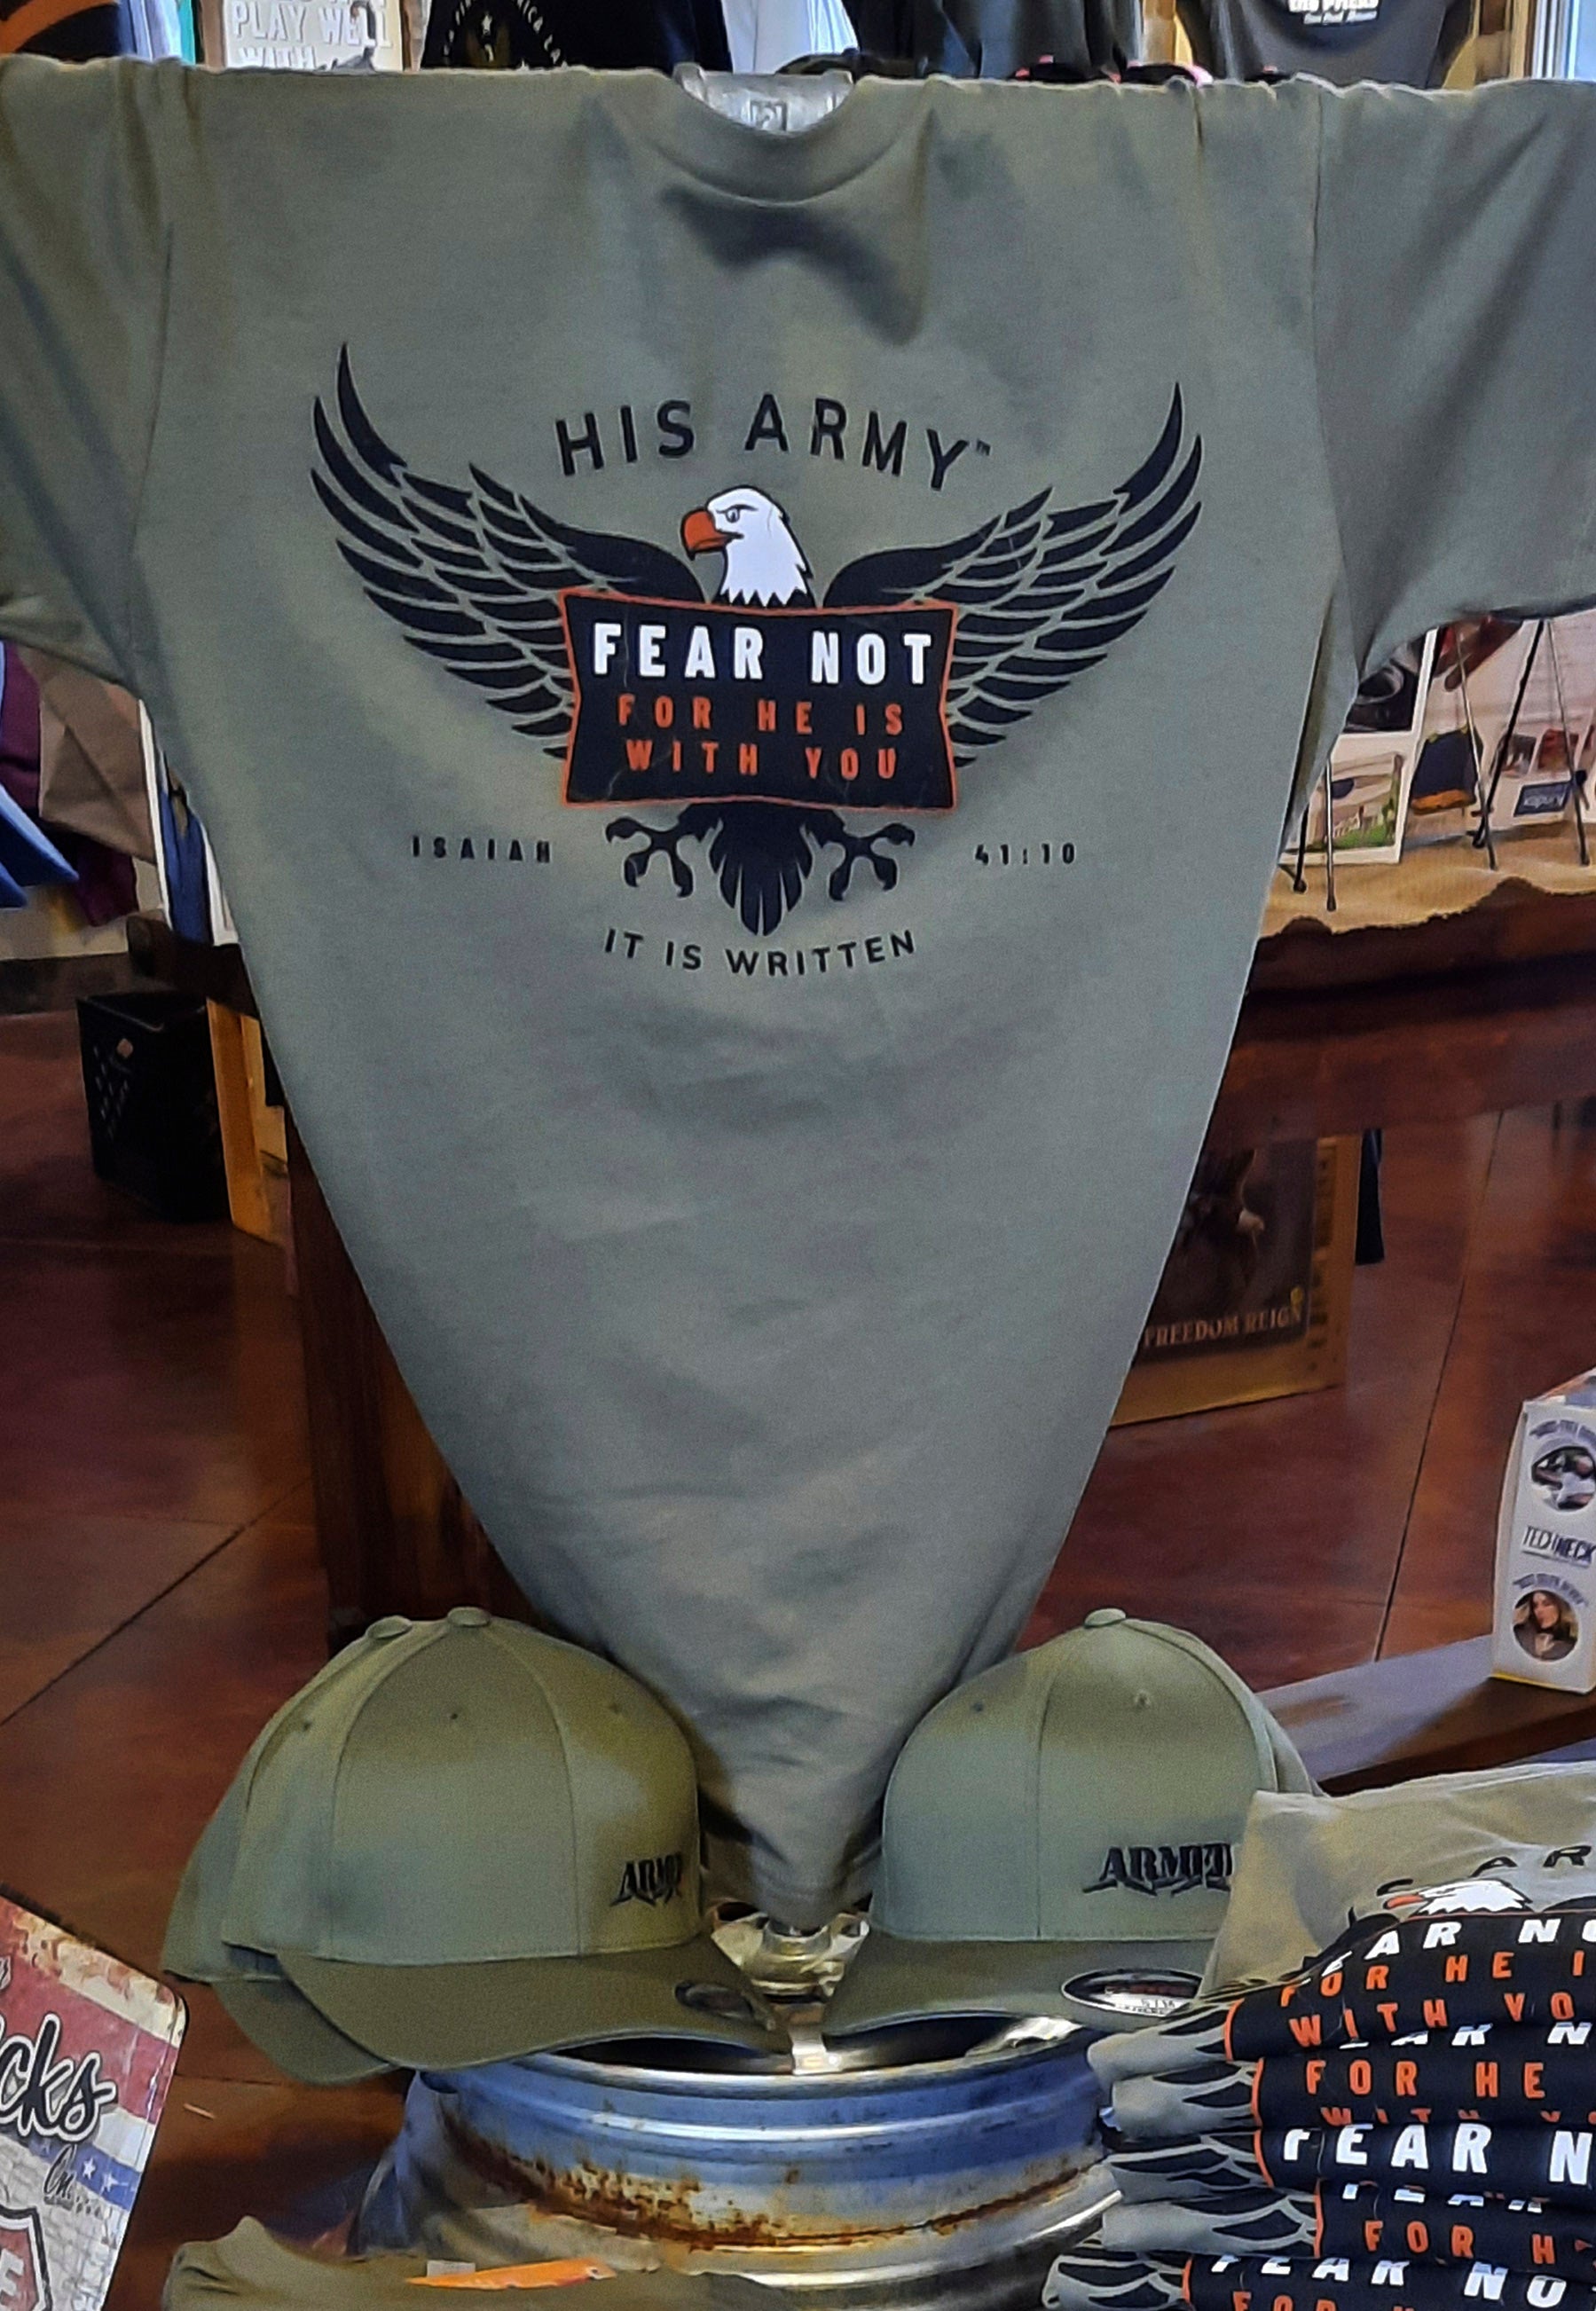 Christian patriot tee shirt in store on display